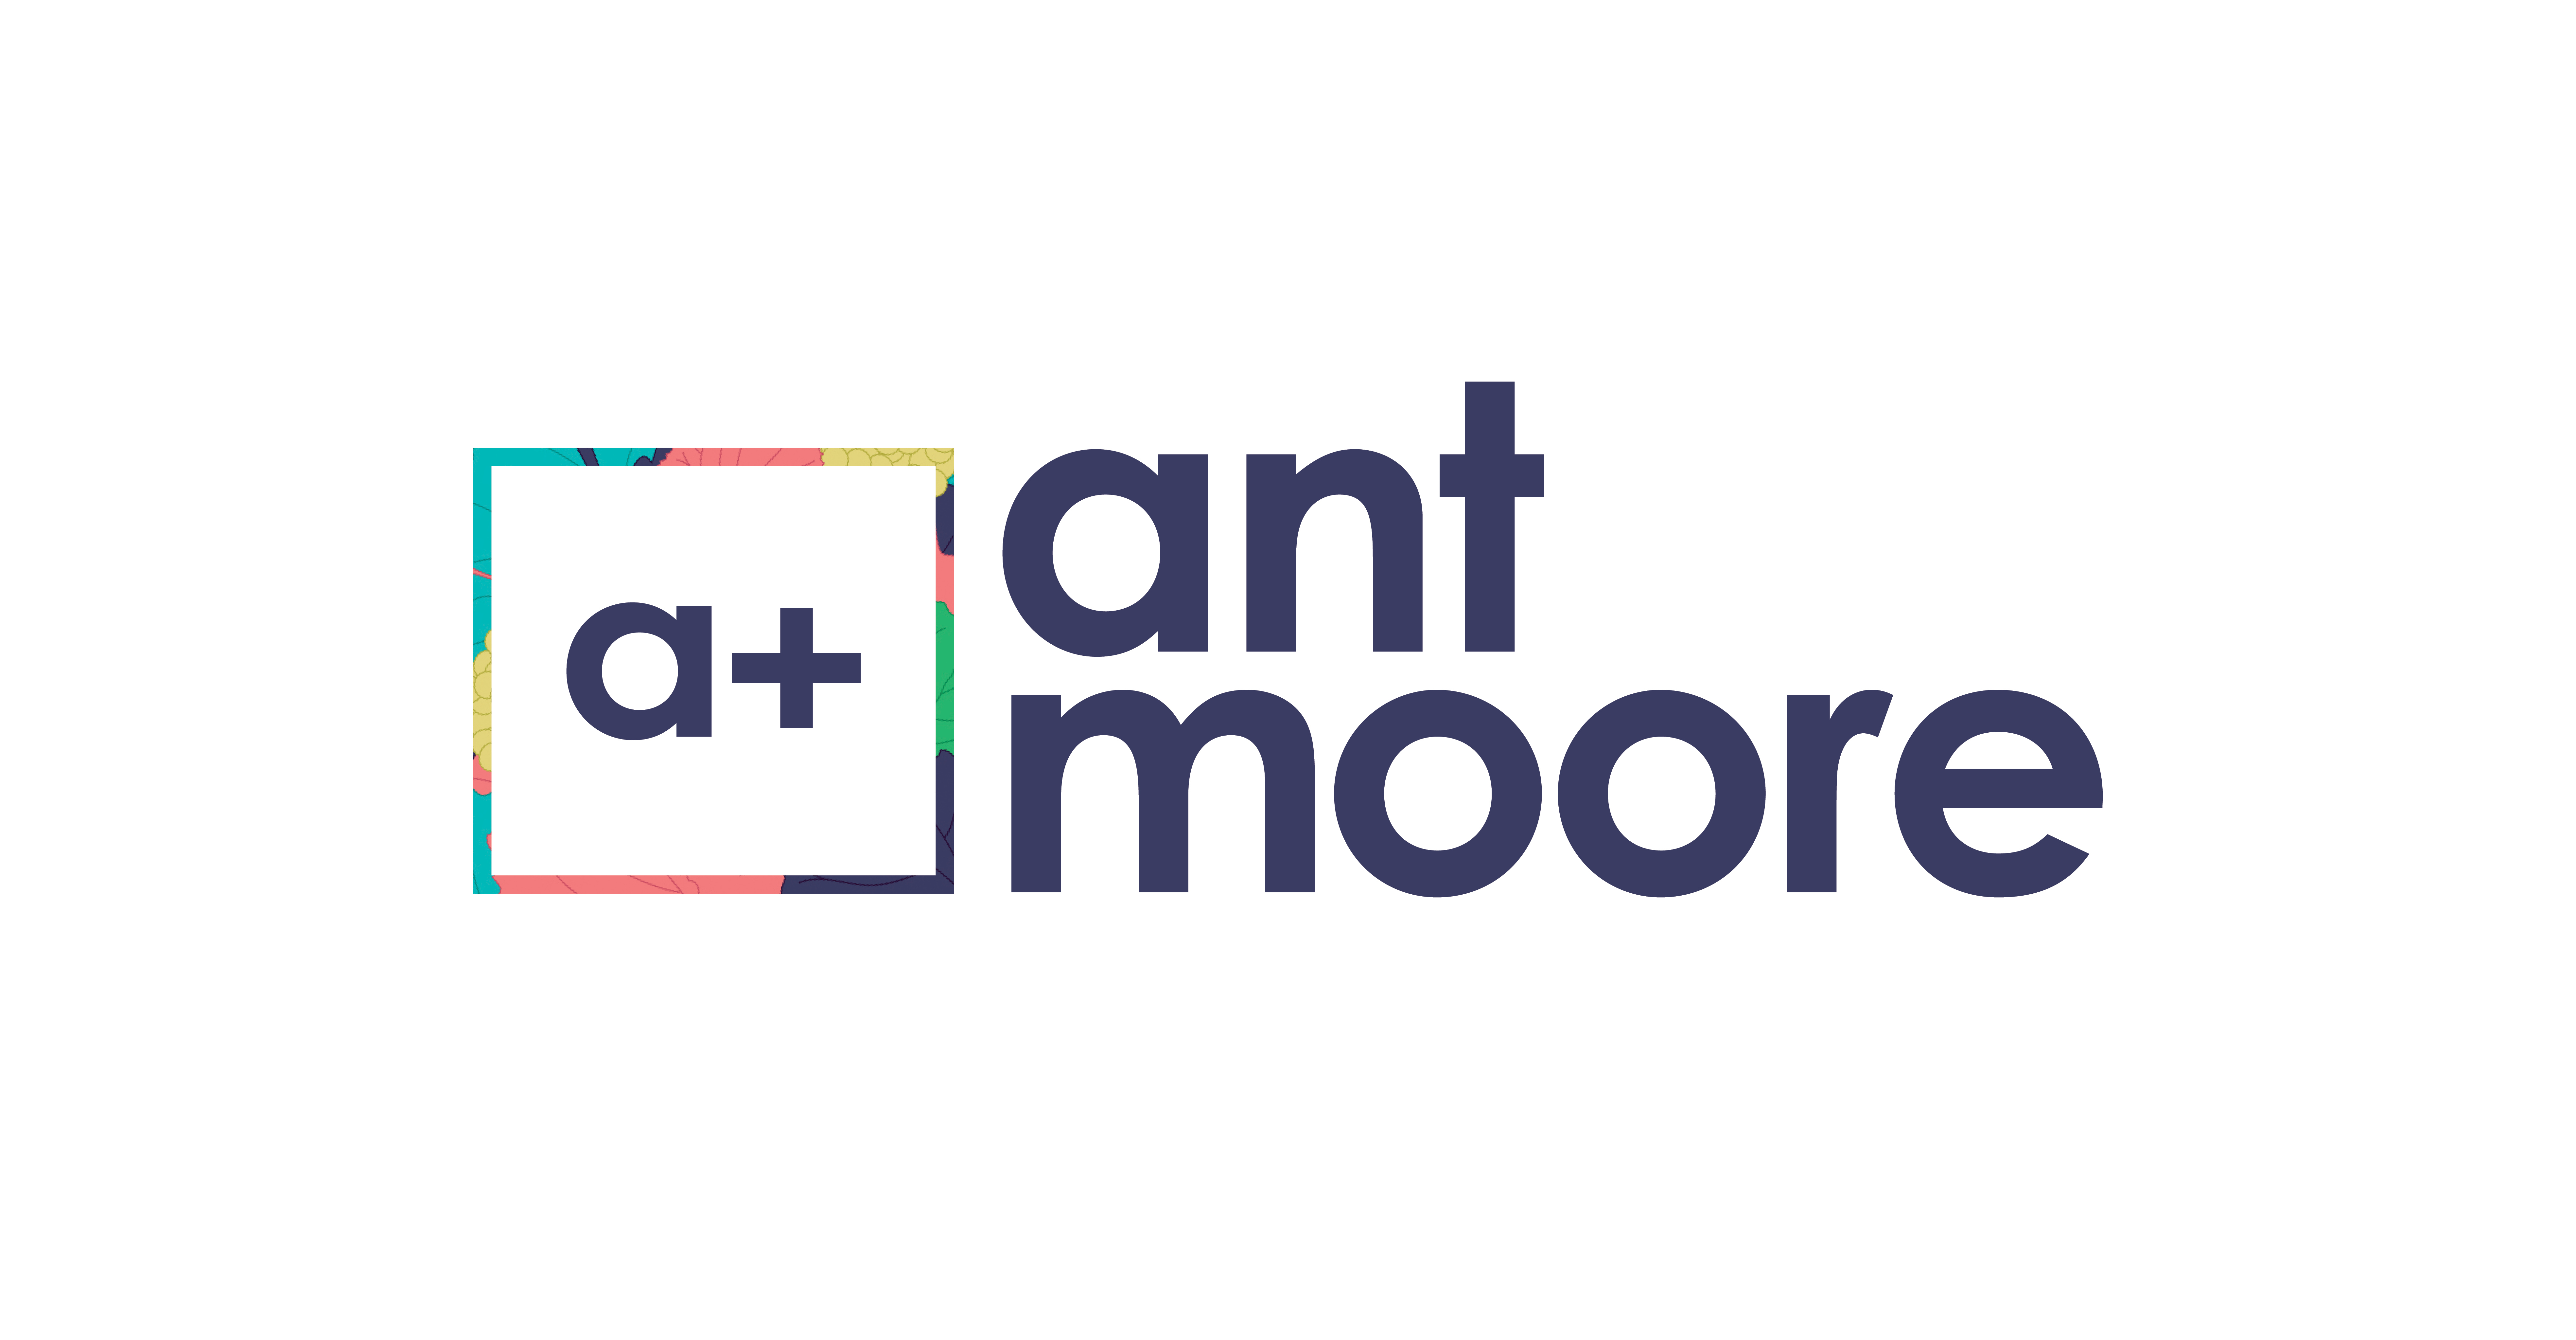 Ant Moore